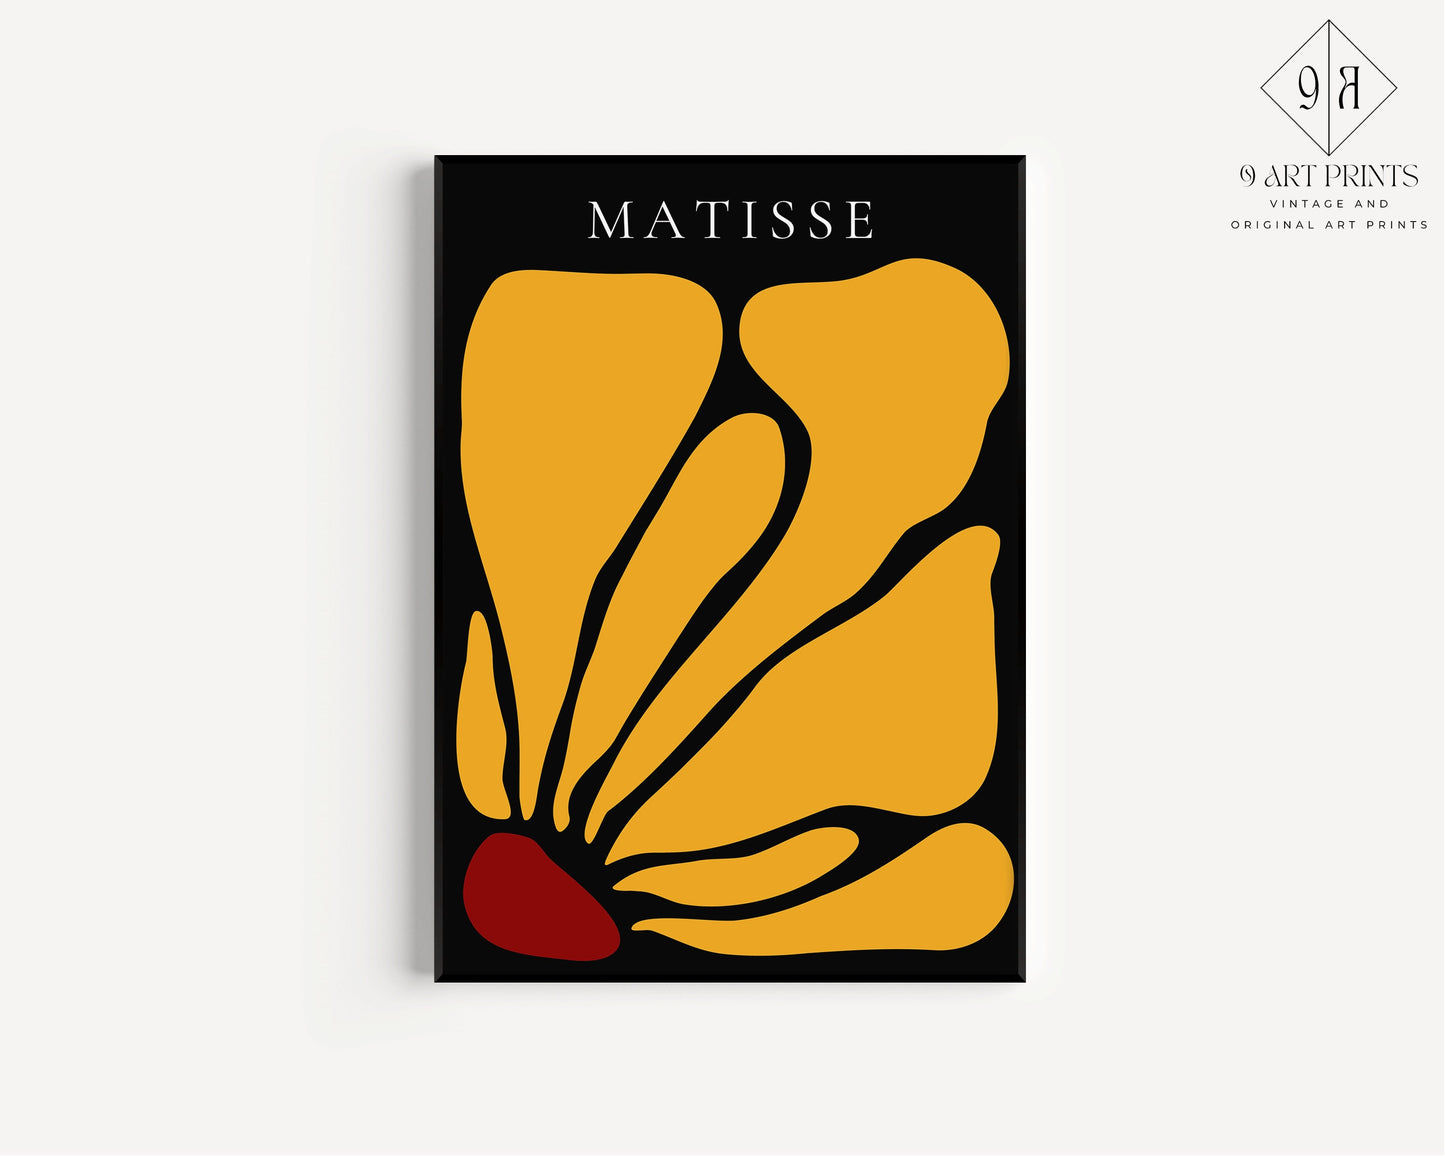 Henri Matisse paper cutout print Red Yellow Black Flower Exhibition Abstract Poster Home Decor Office Museum Print Ready to hang Framed Gift